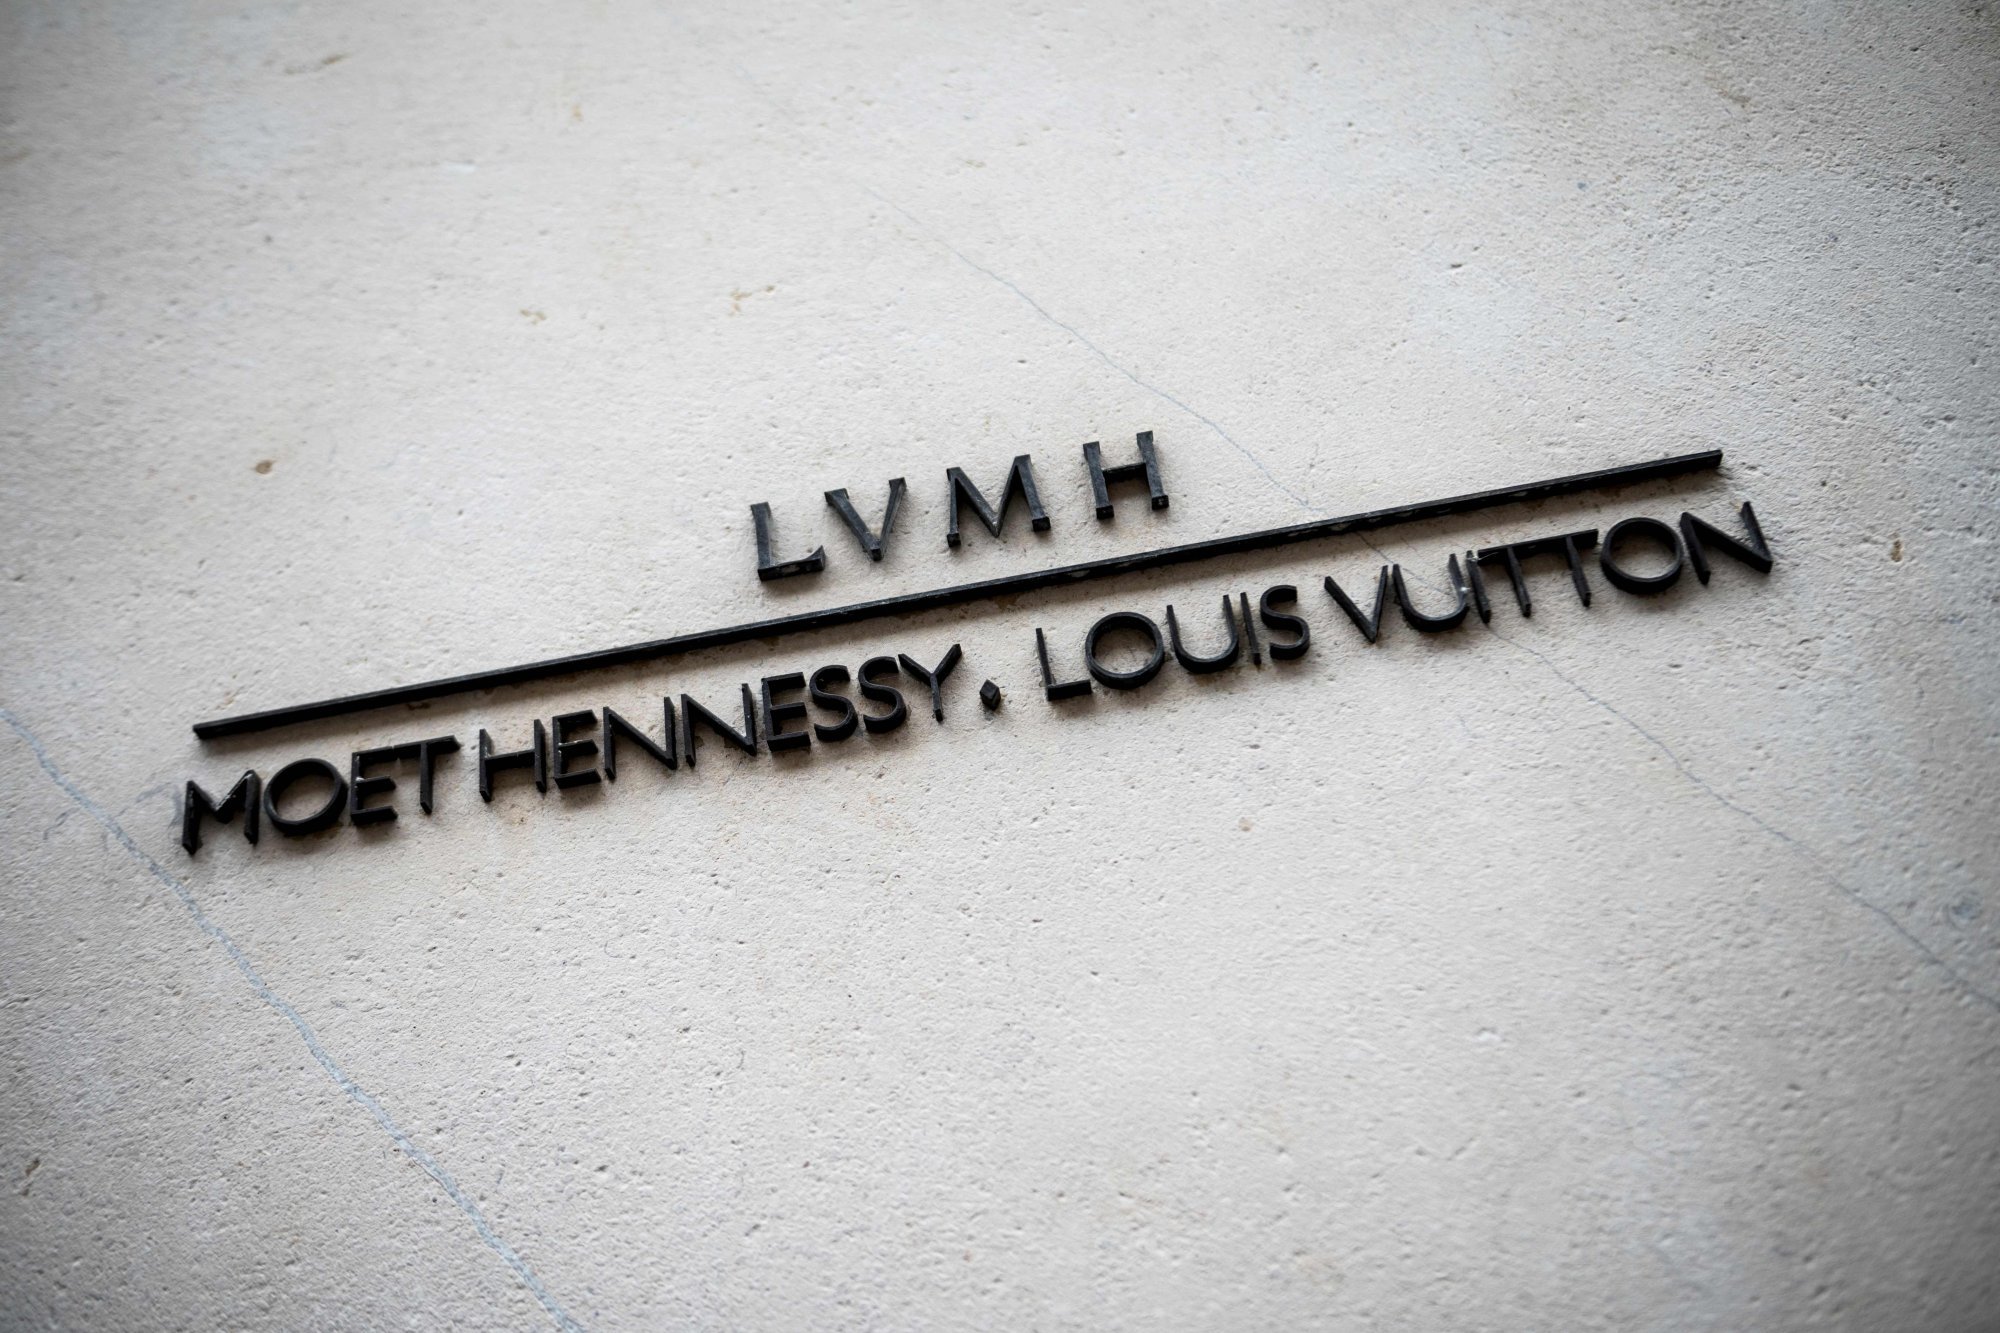 Louis Vuitton Moet Hennessy(LVMH) is the most valuable luxury